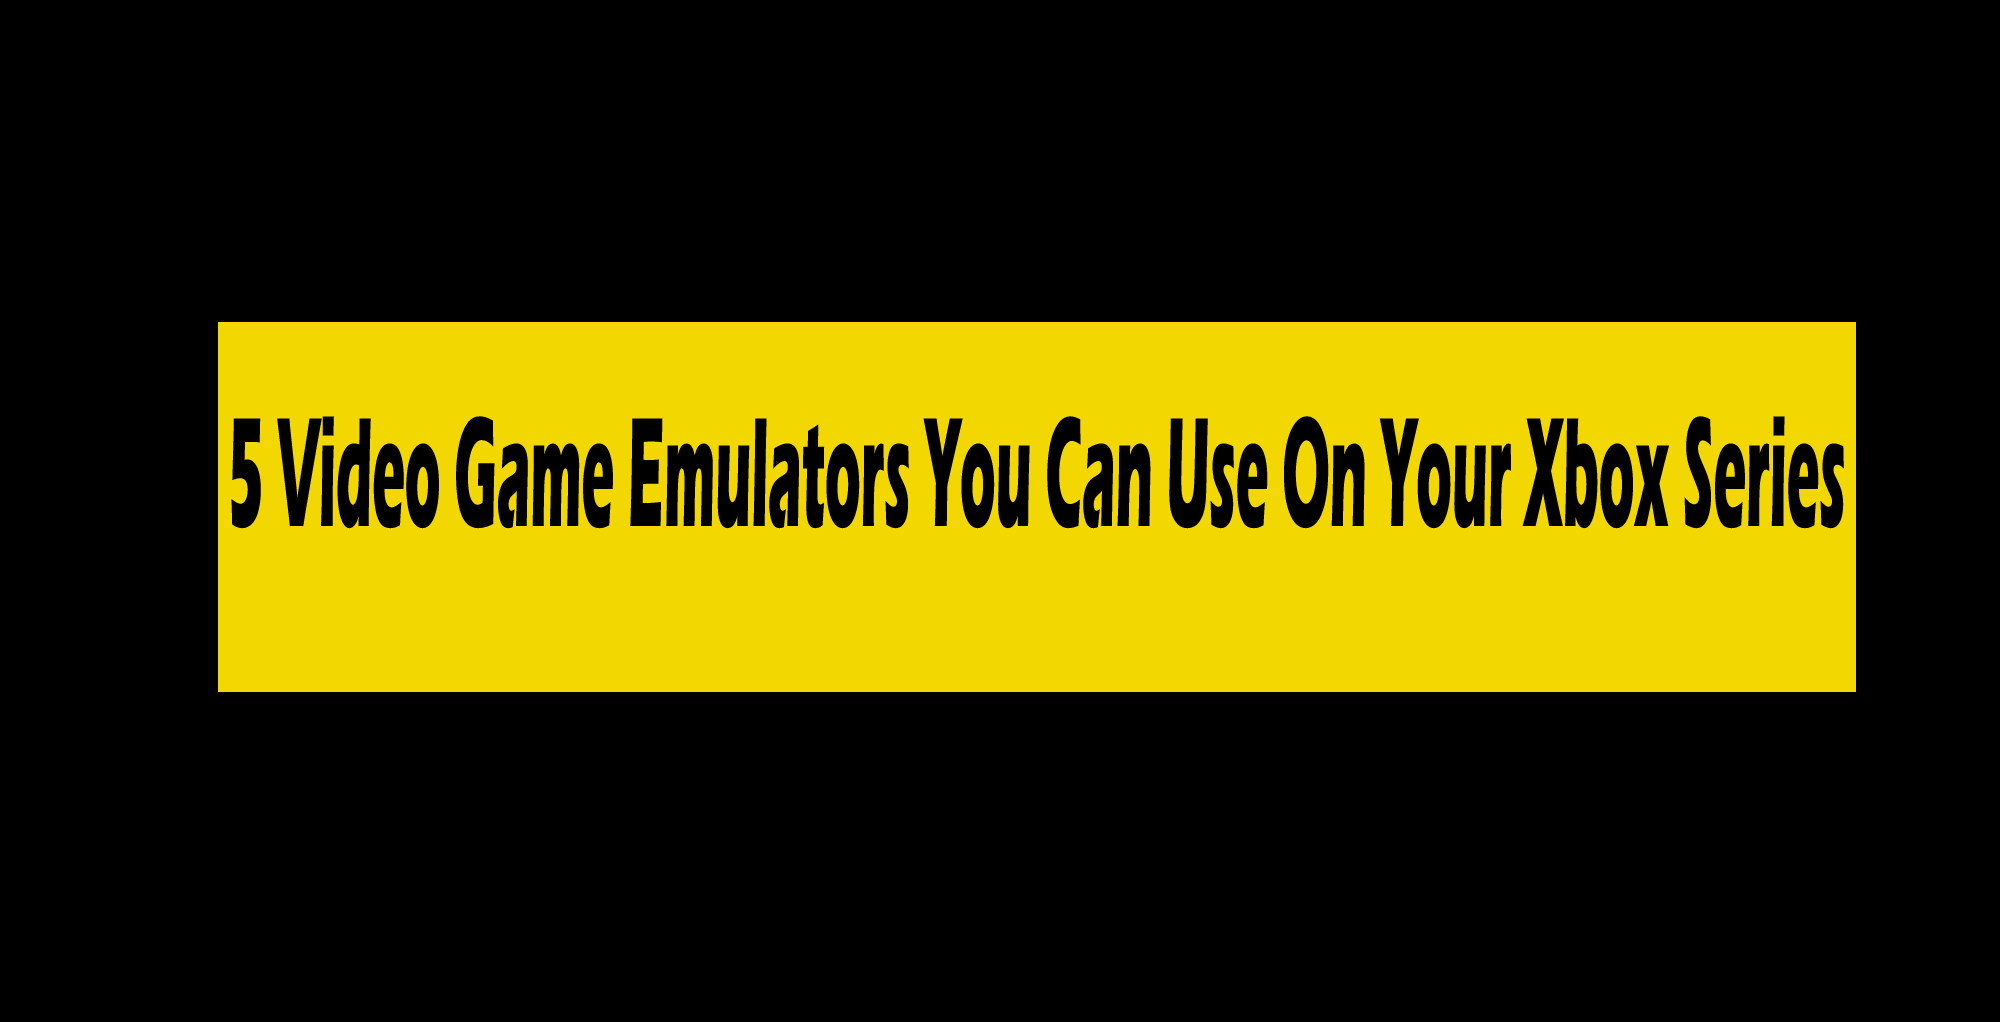 5 Video Game Emulators You Can Use On Your Xbox Series X